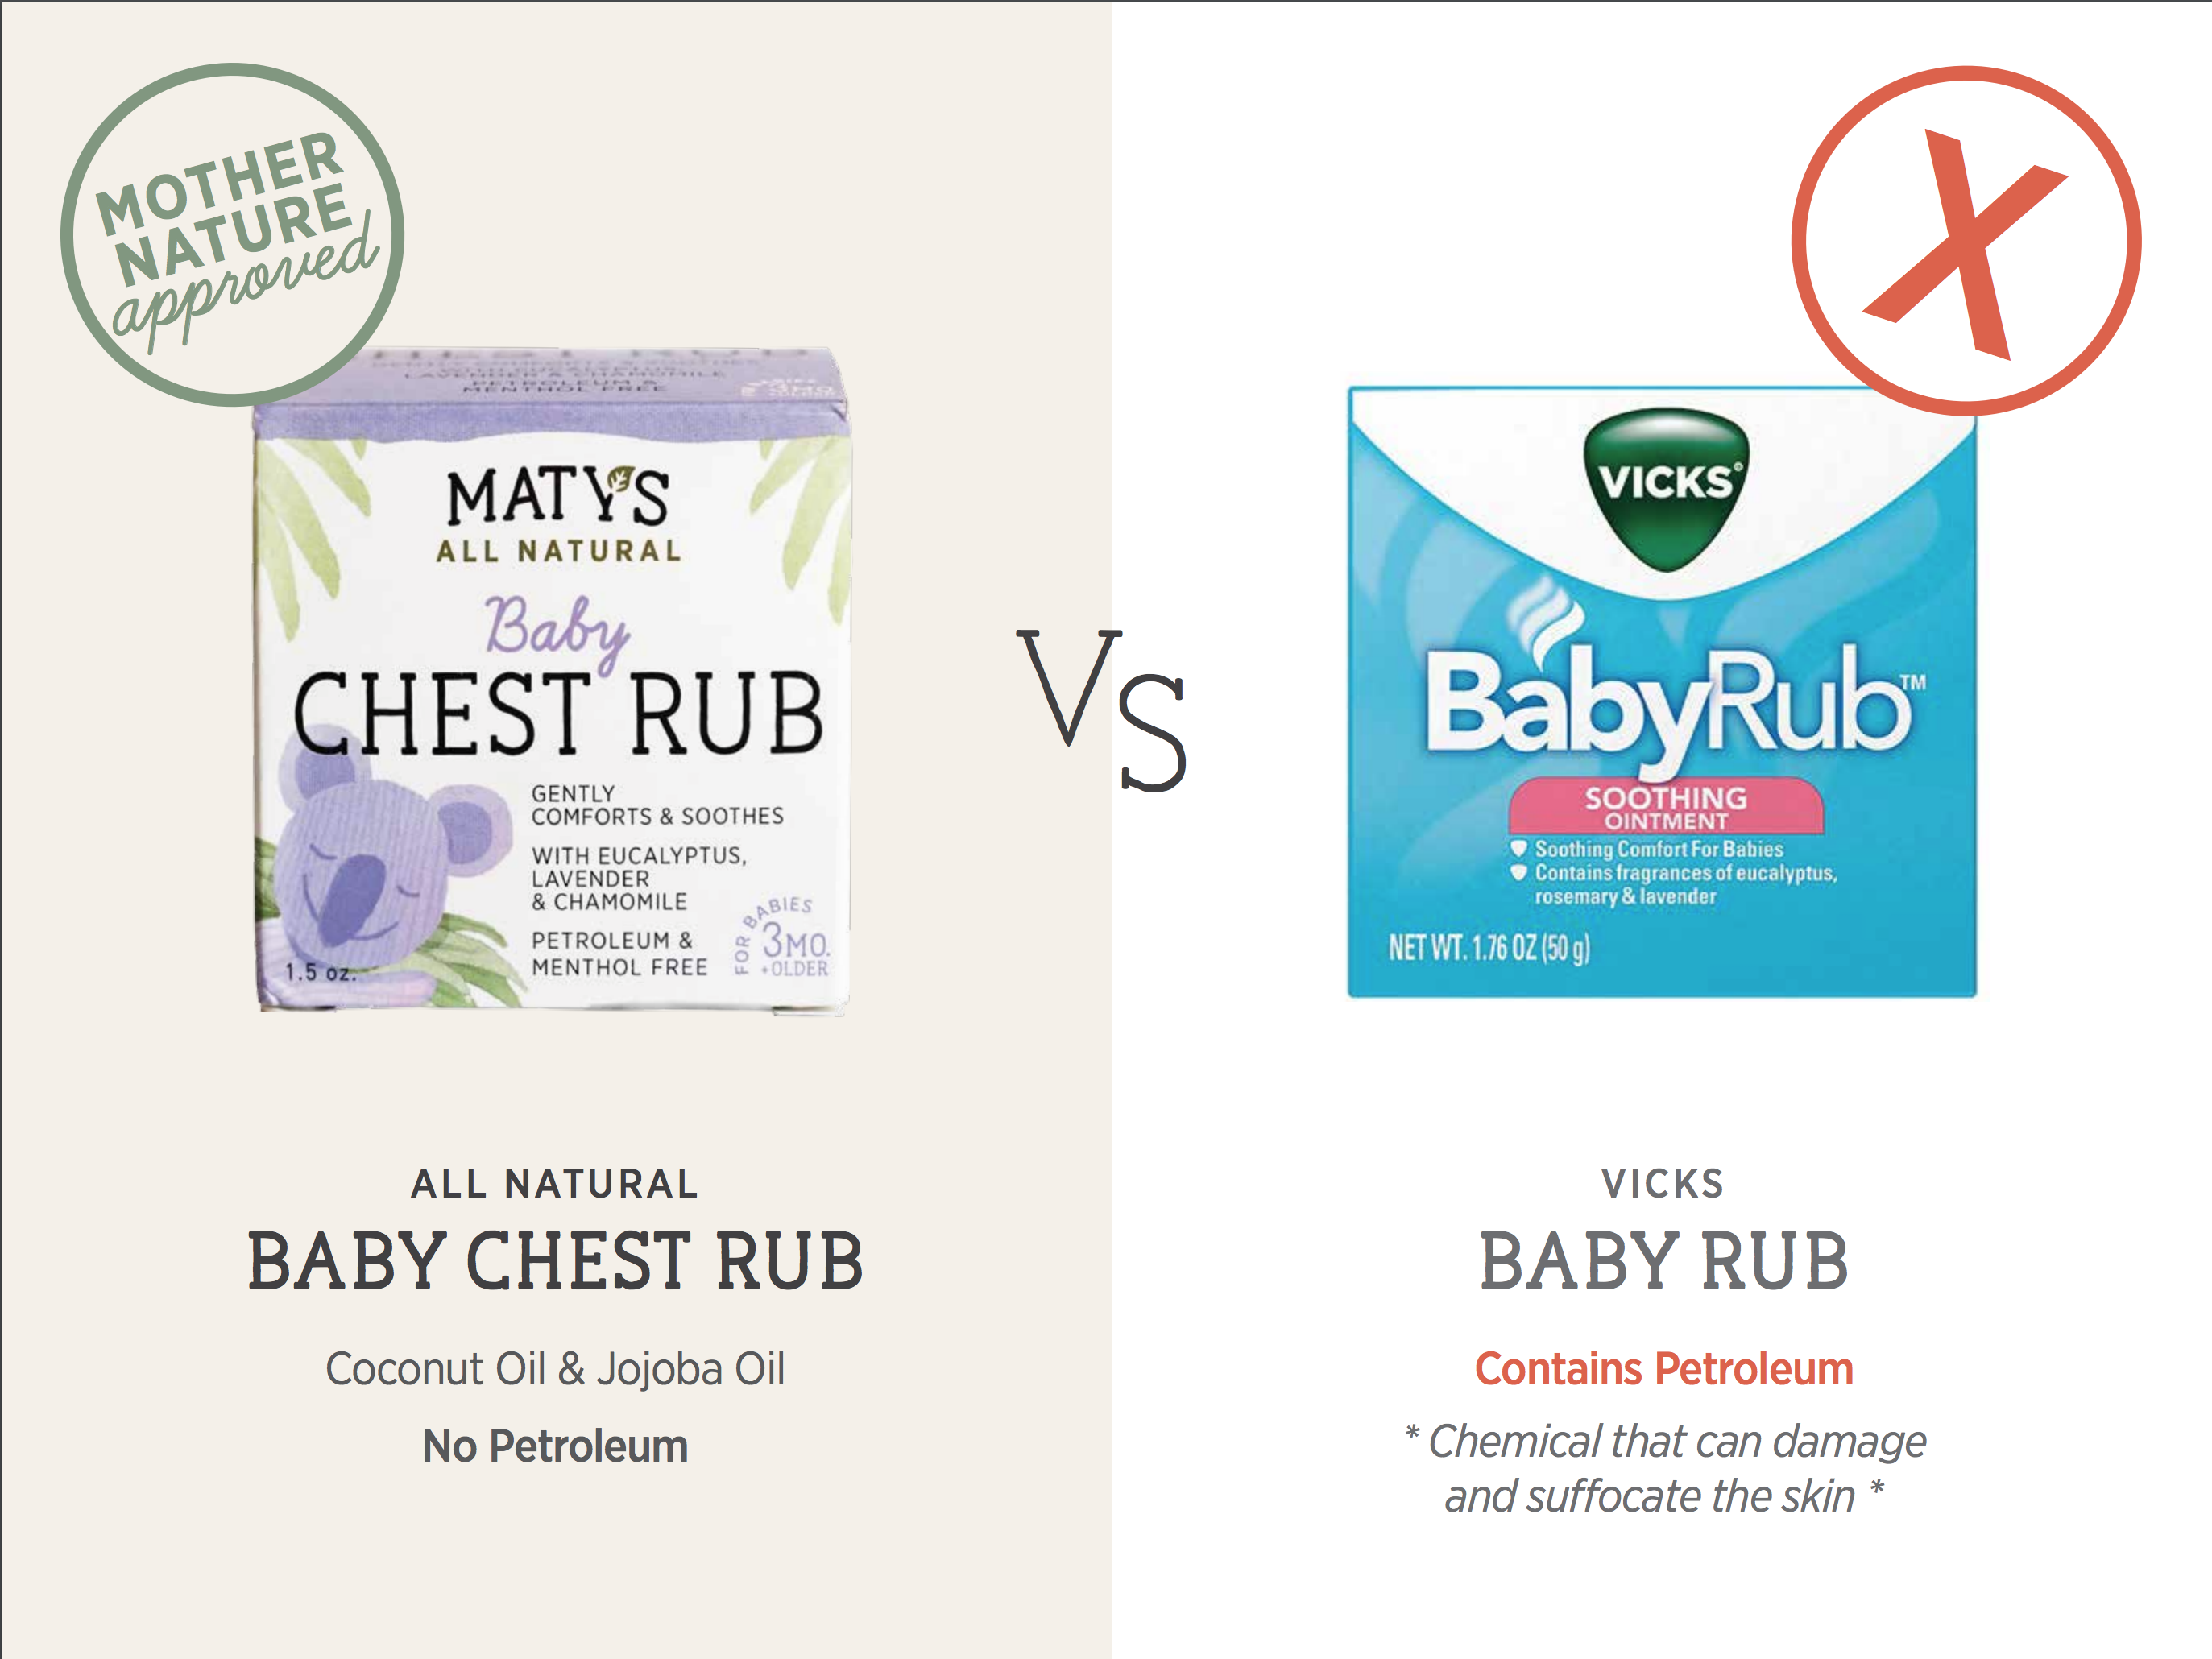 All Natural replacement for Vicks BabyRub